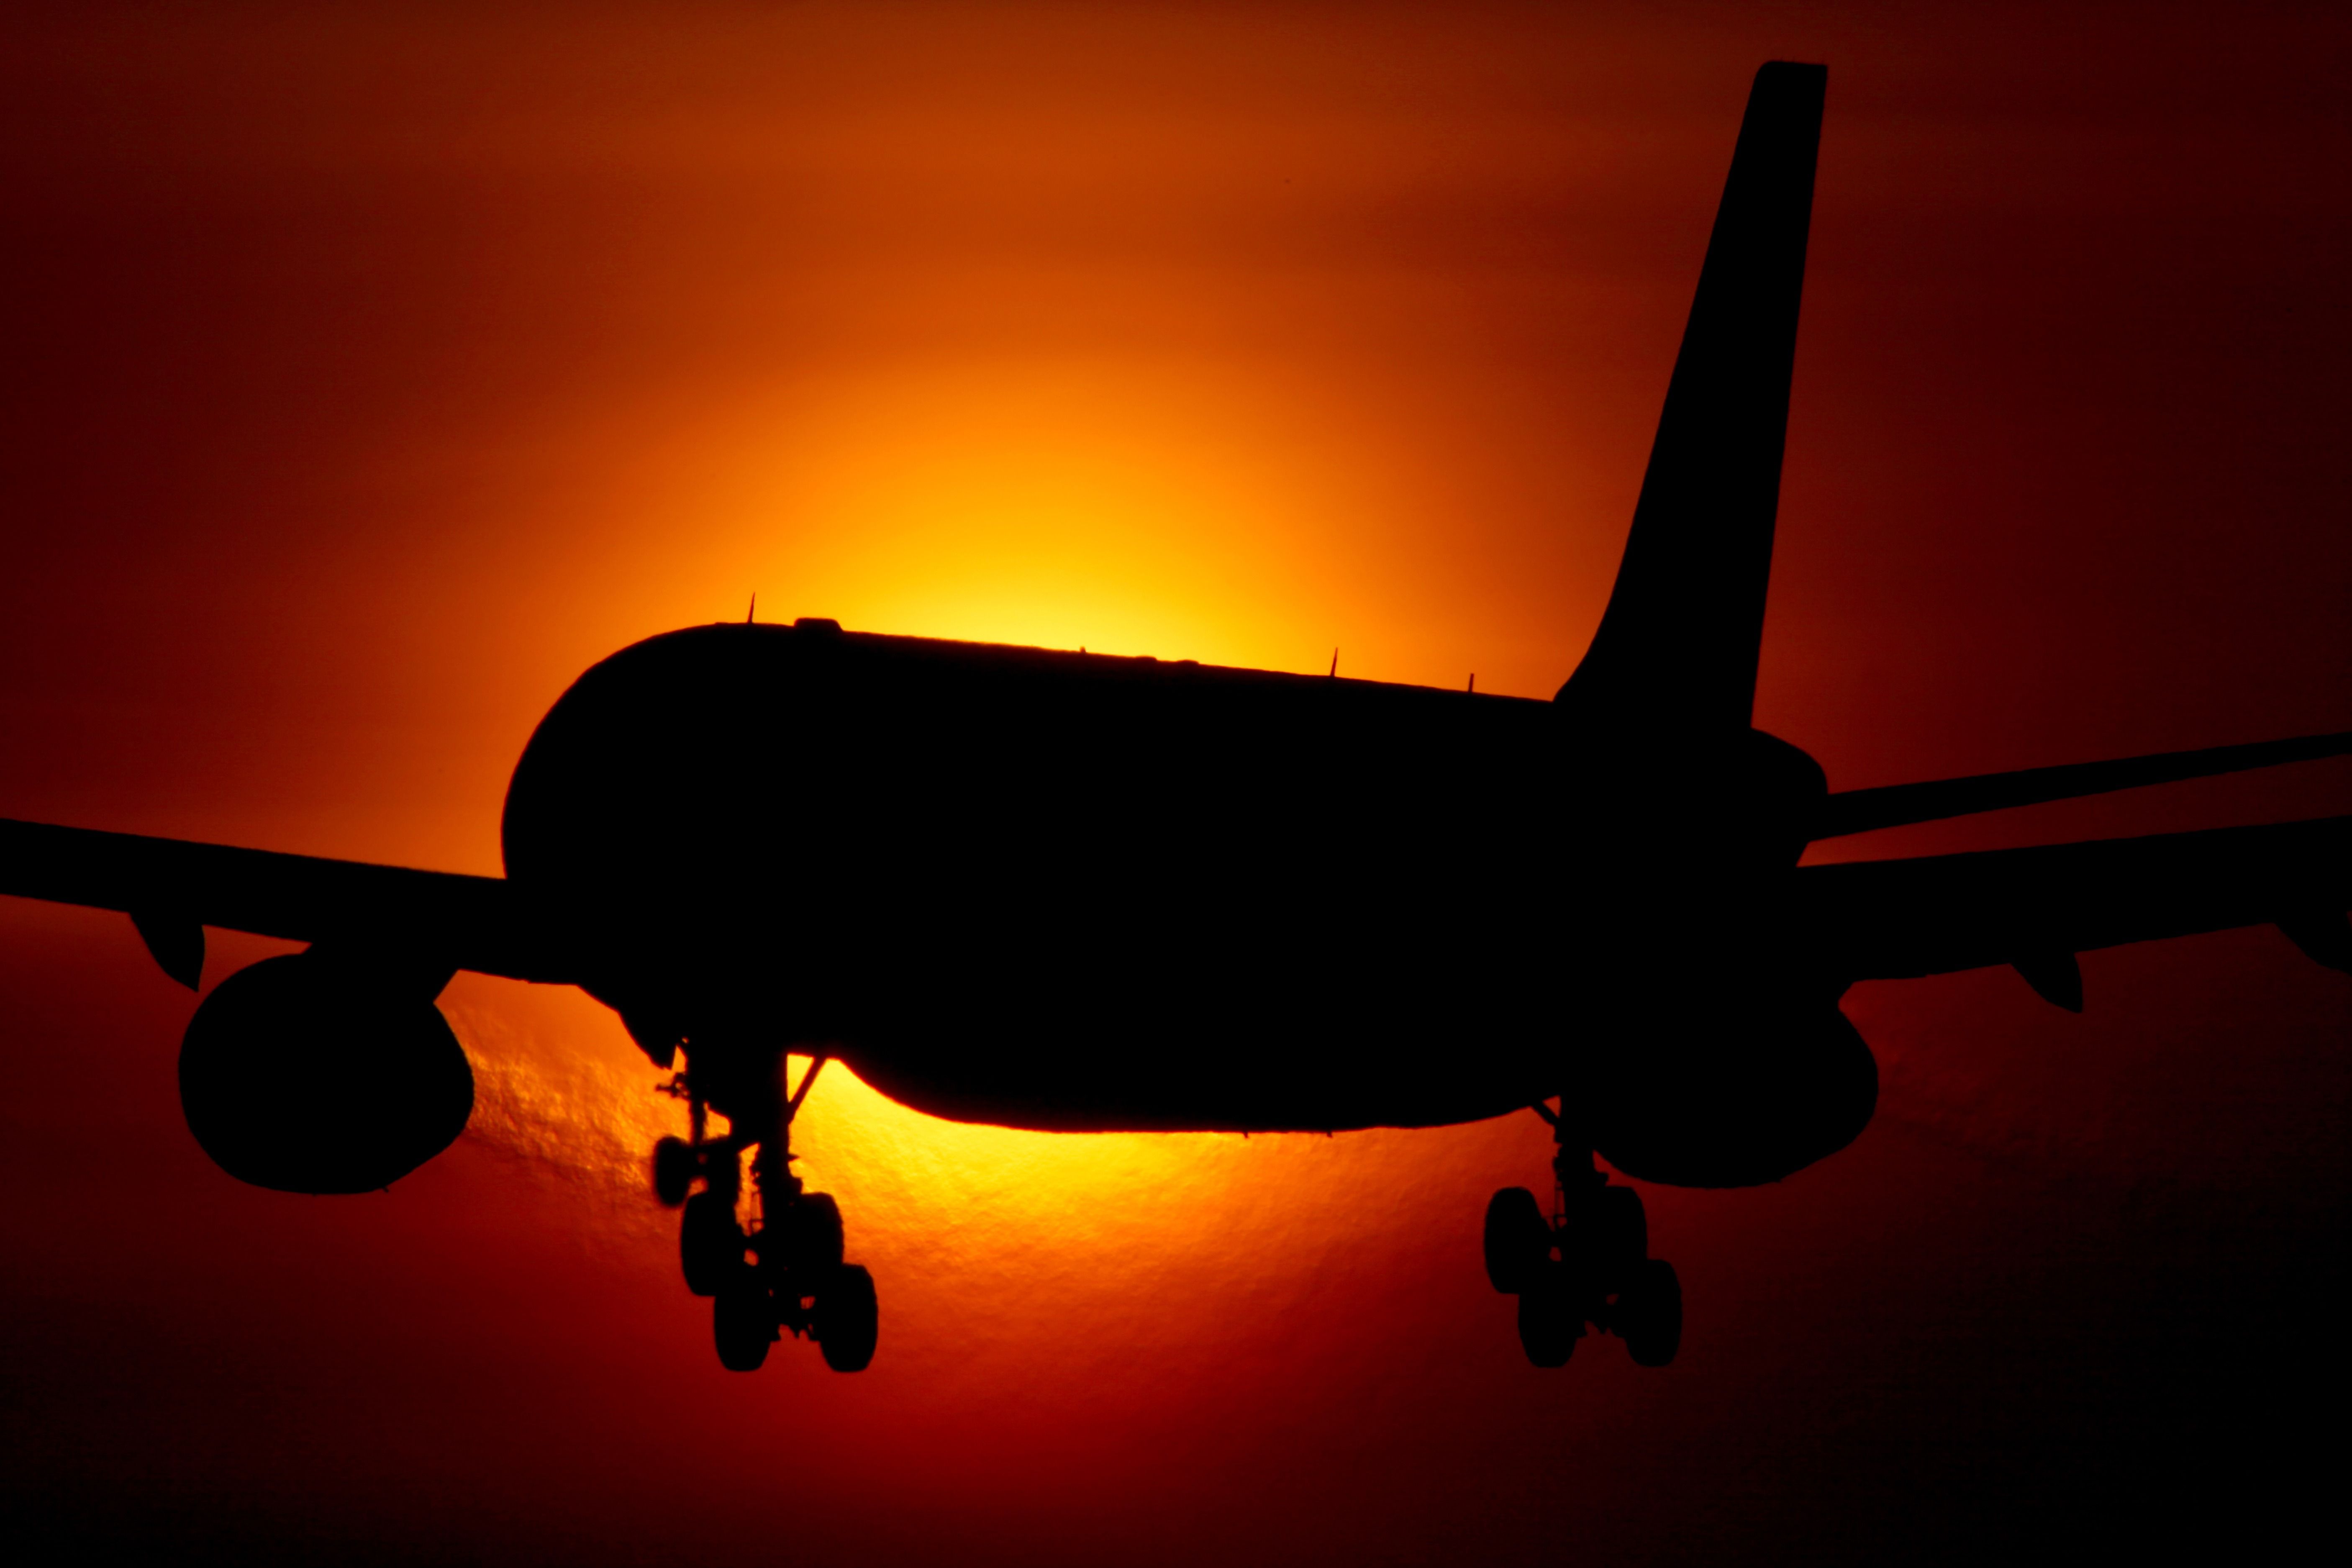 Airbus A330 aircraft in front of the sun